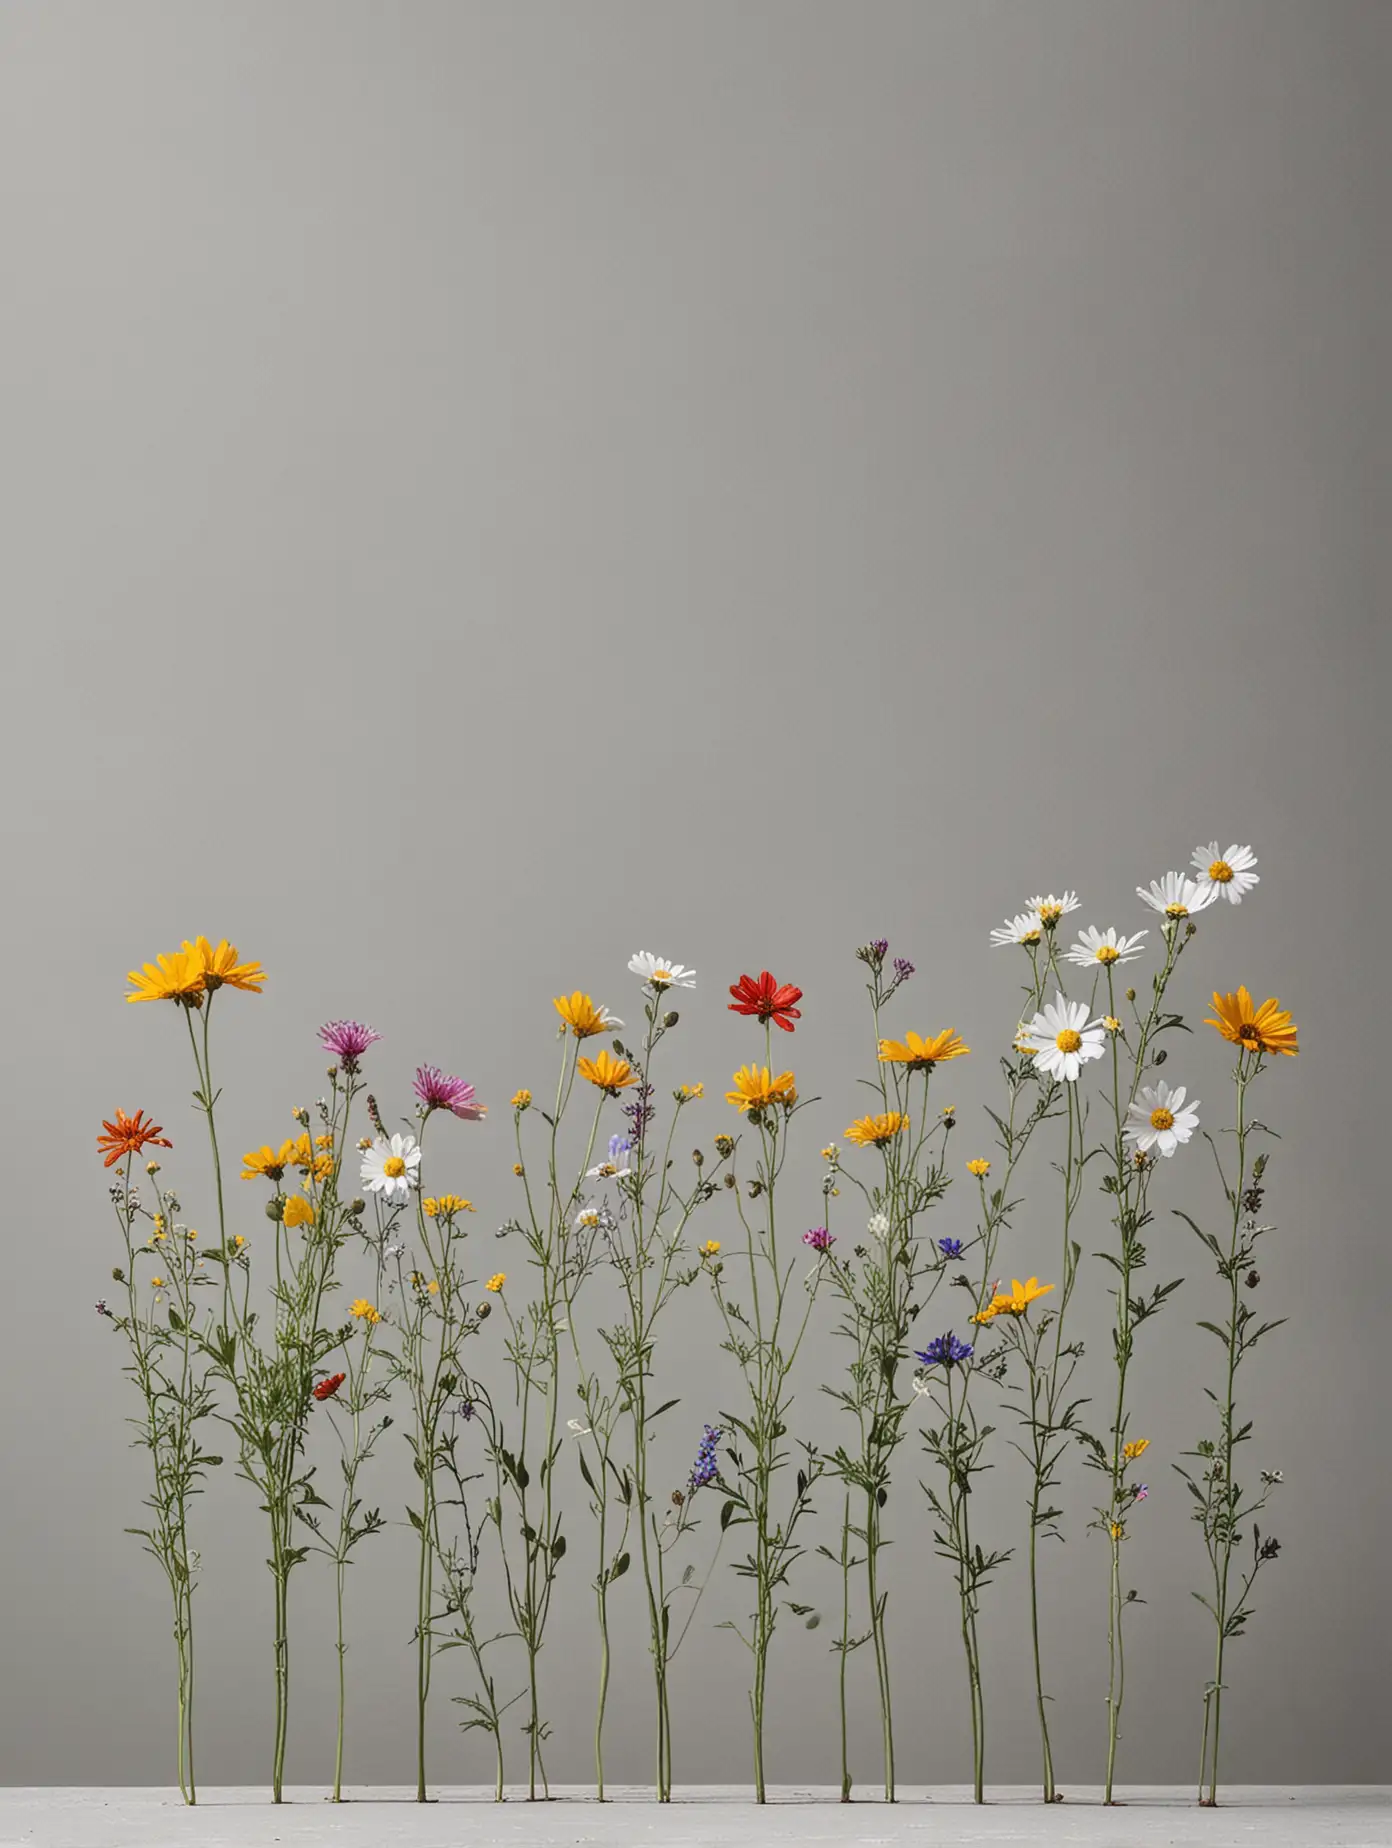 a single row of wildflowers grow in front of a neutral gray background.